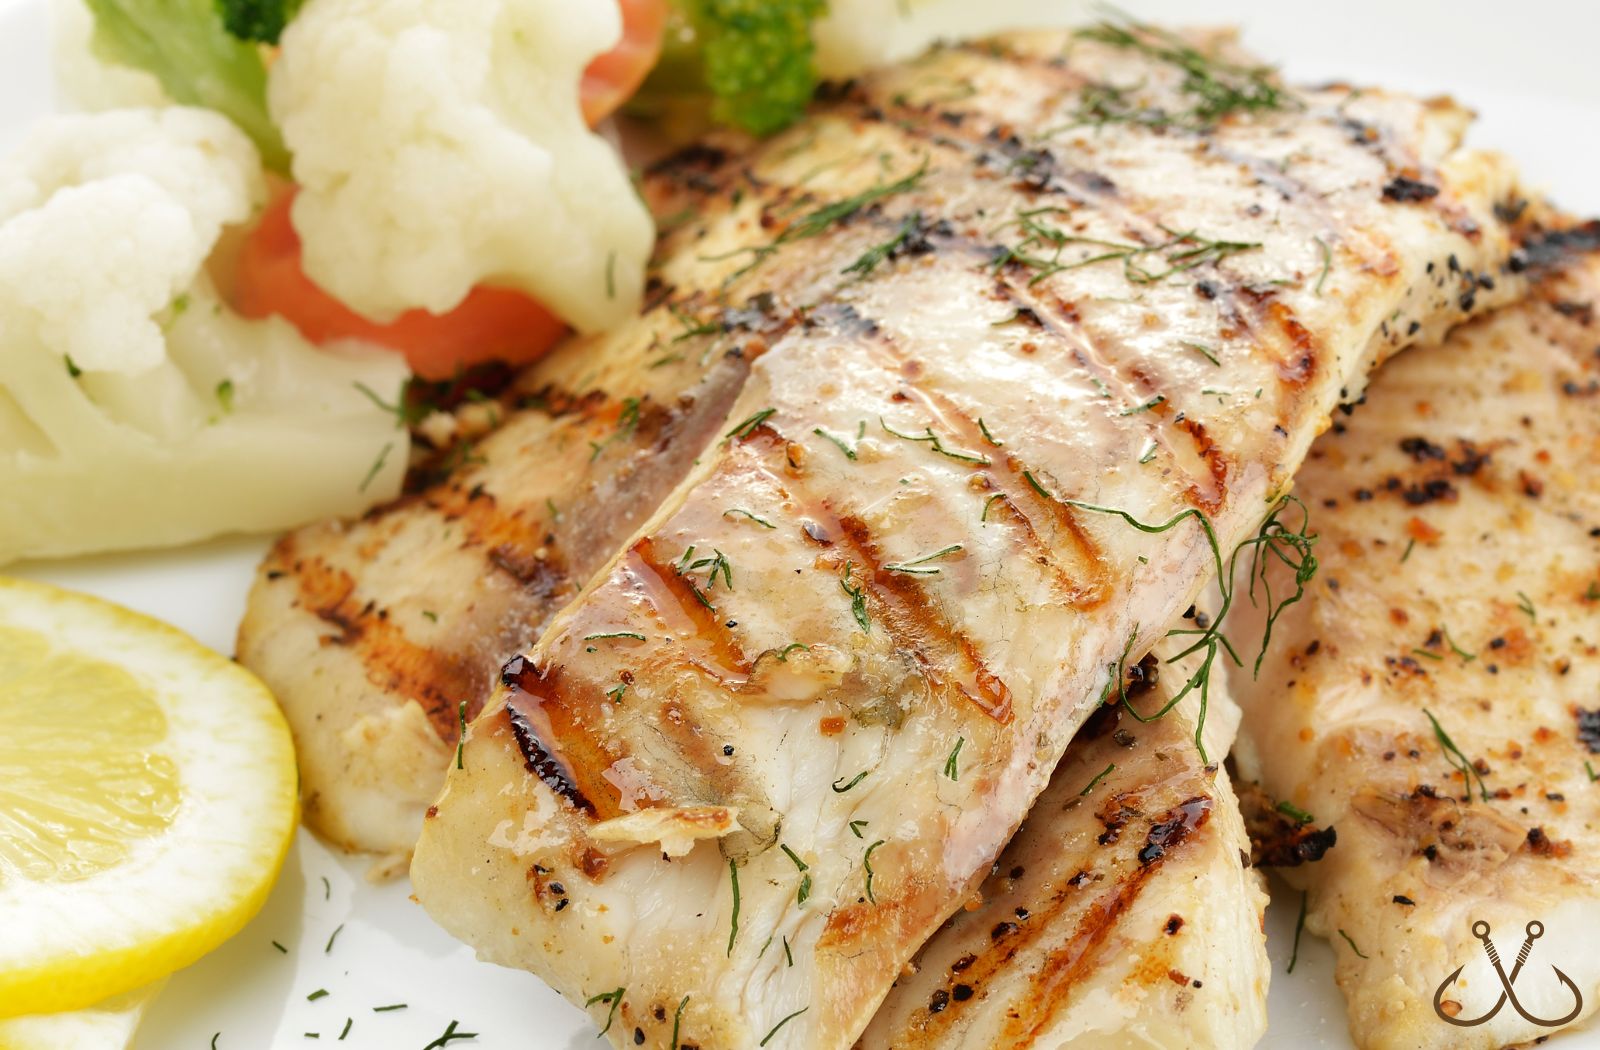 Grilled redfish on a plate with mixed veggies and lemon slices